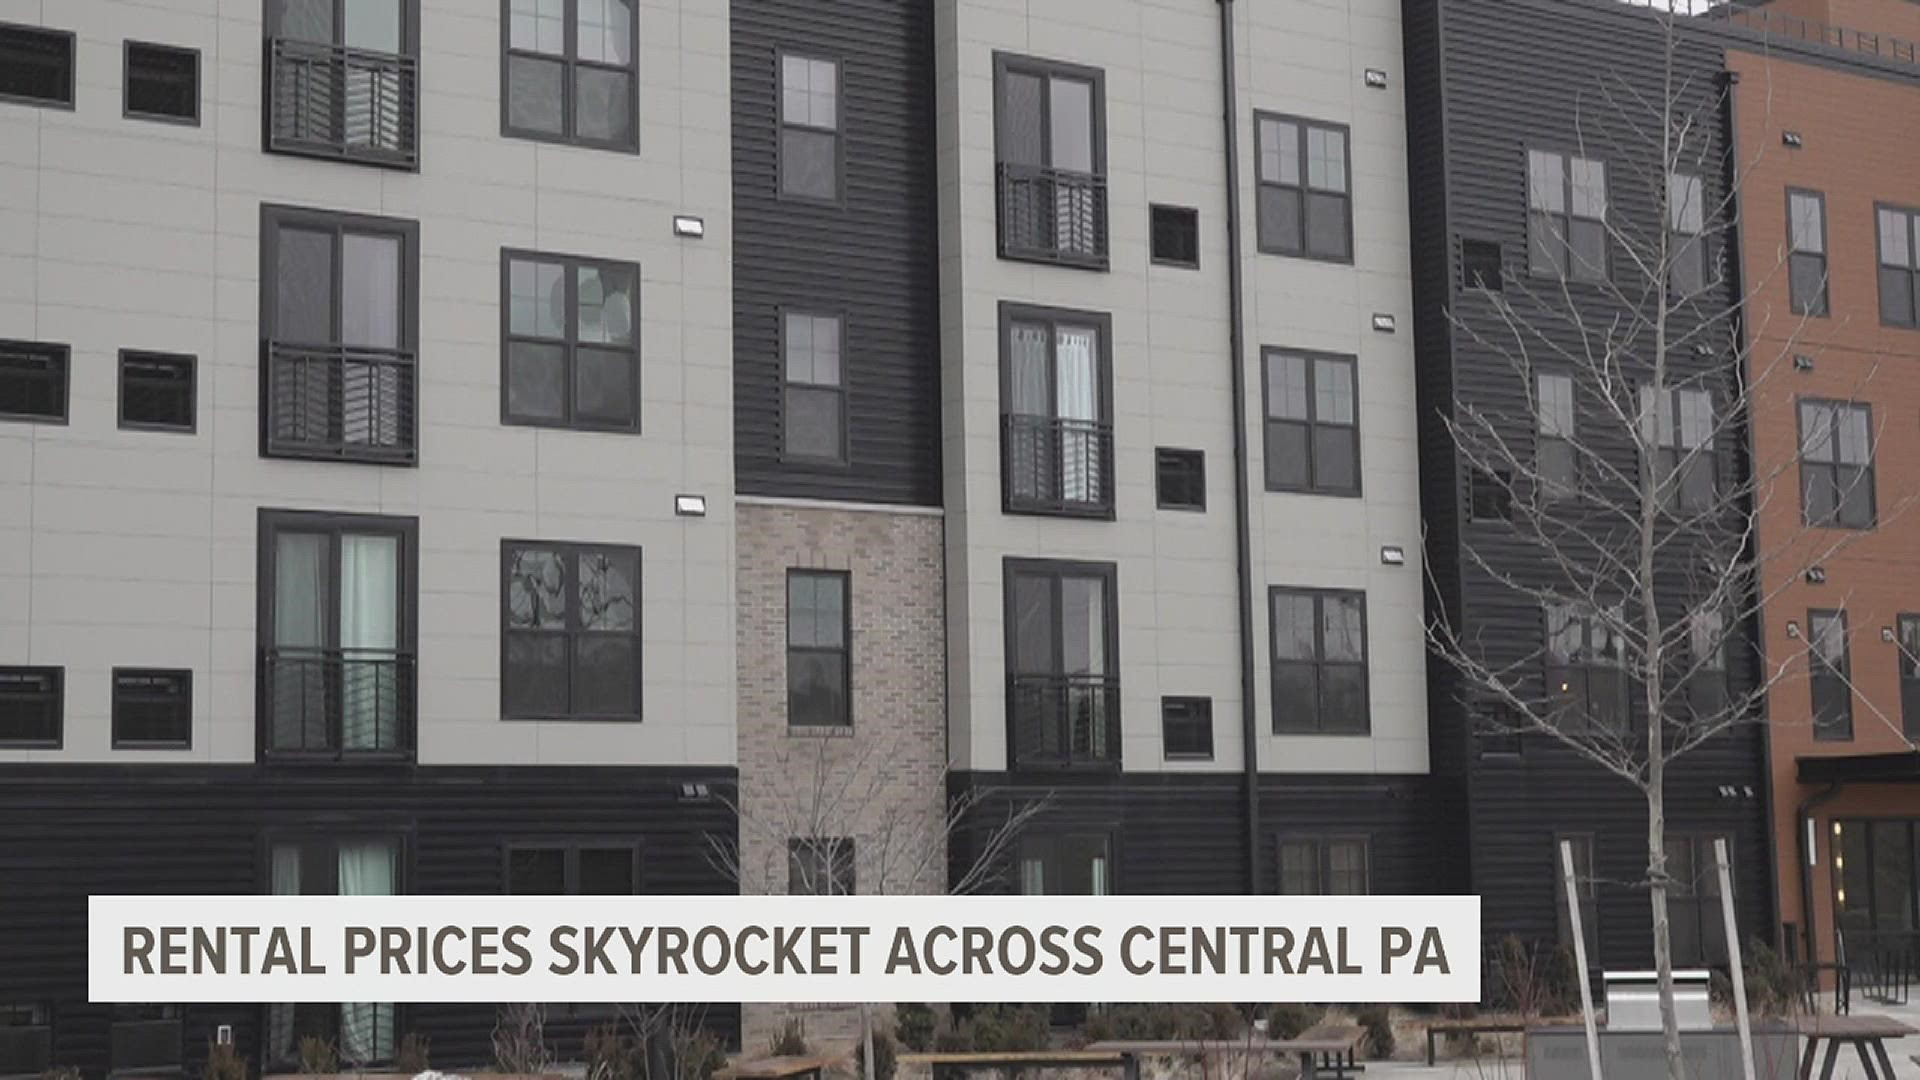 High demand and low inventory are translating into sky-high rental costs.